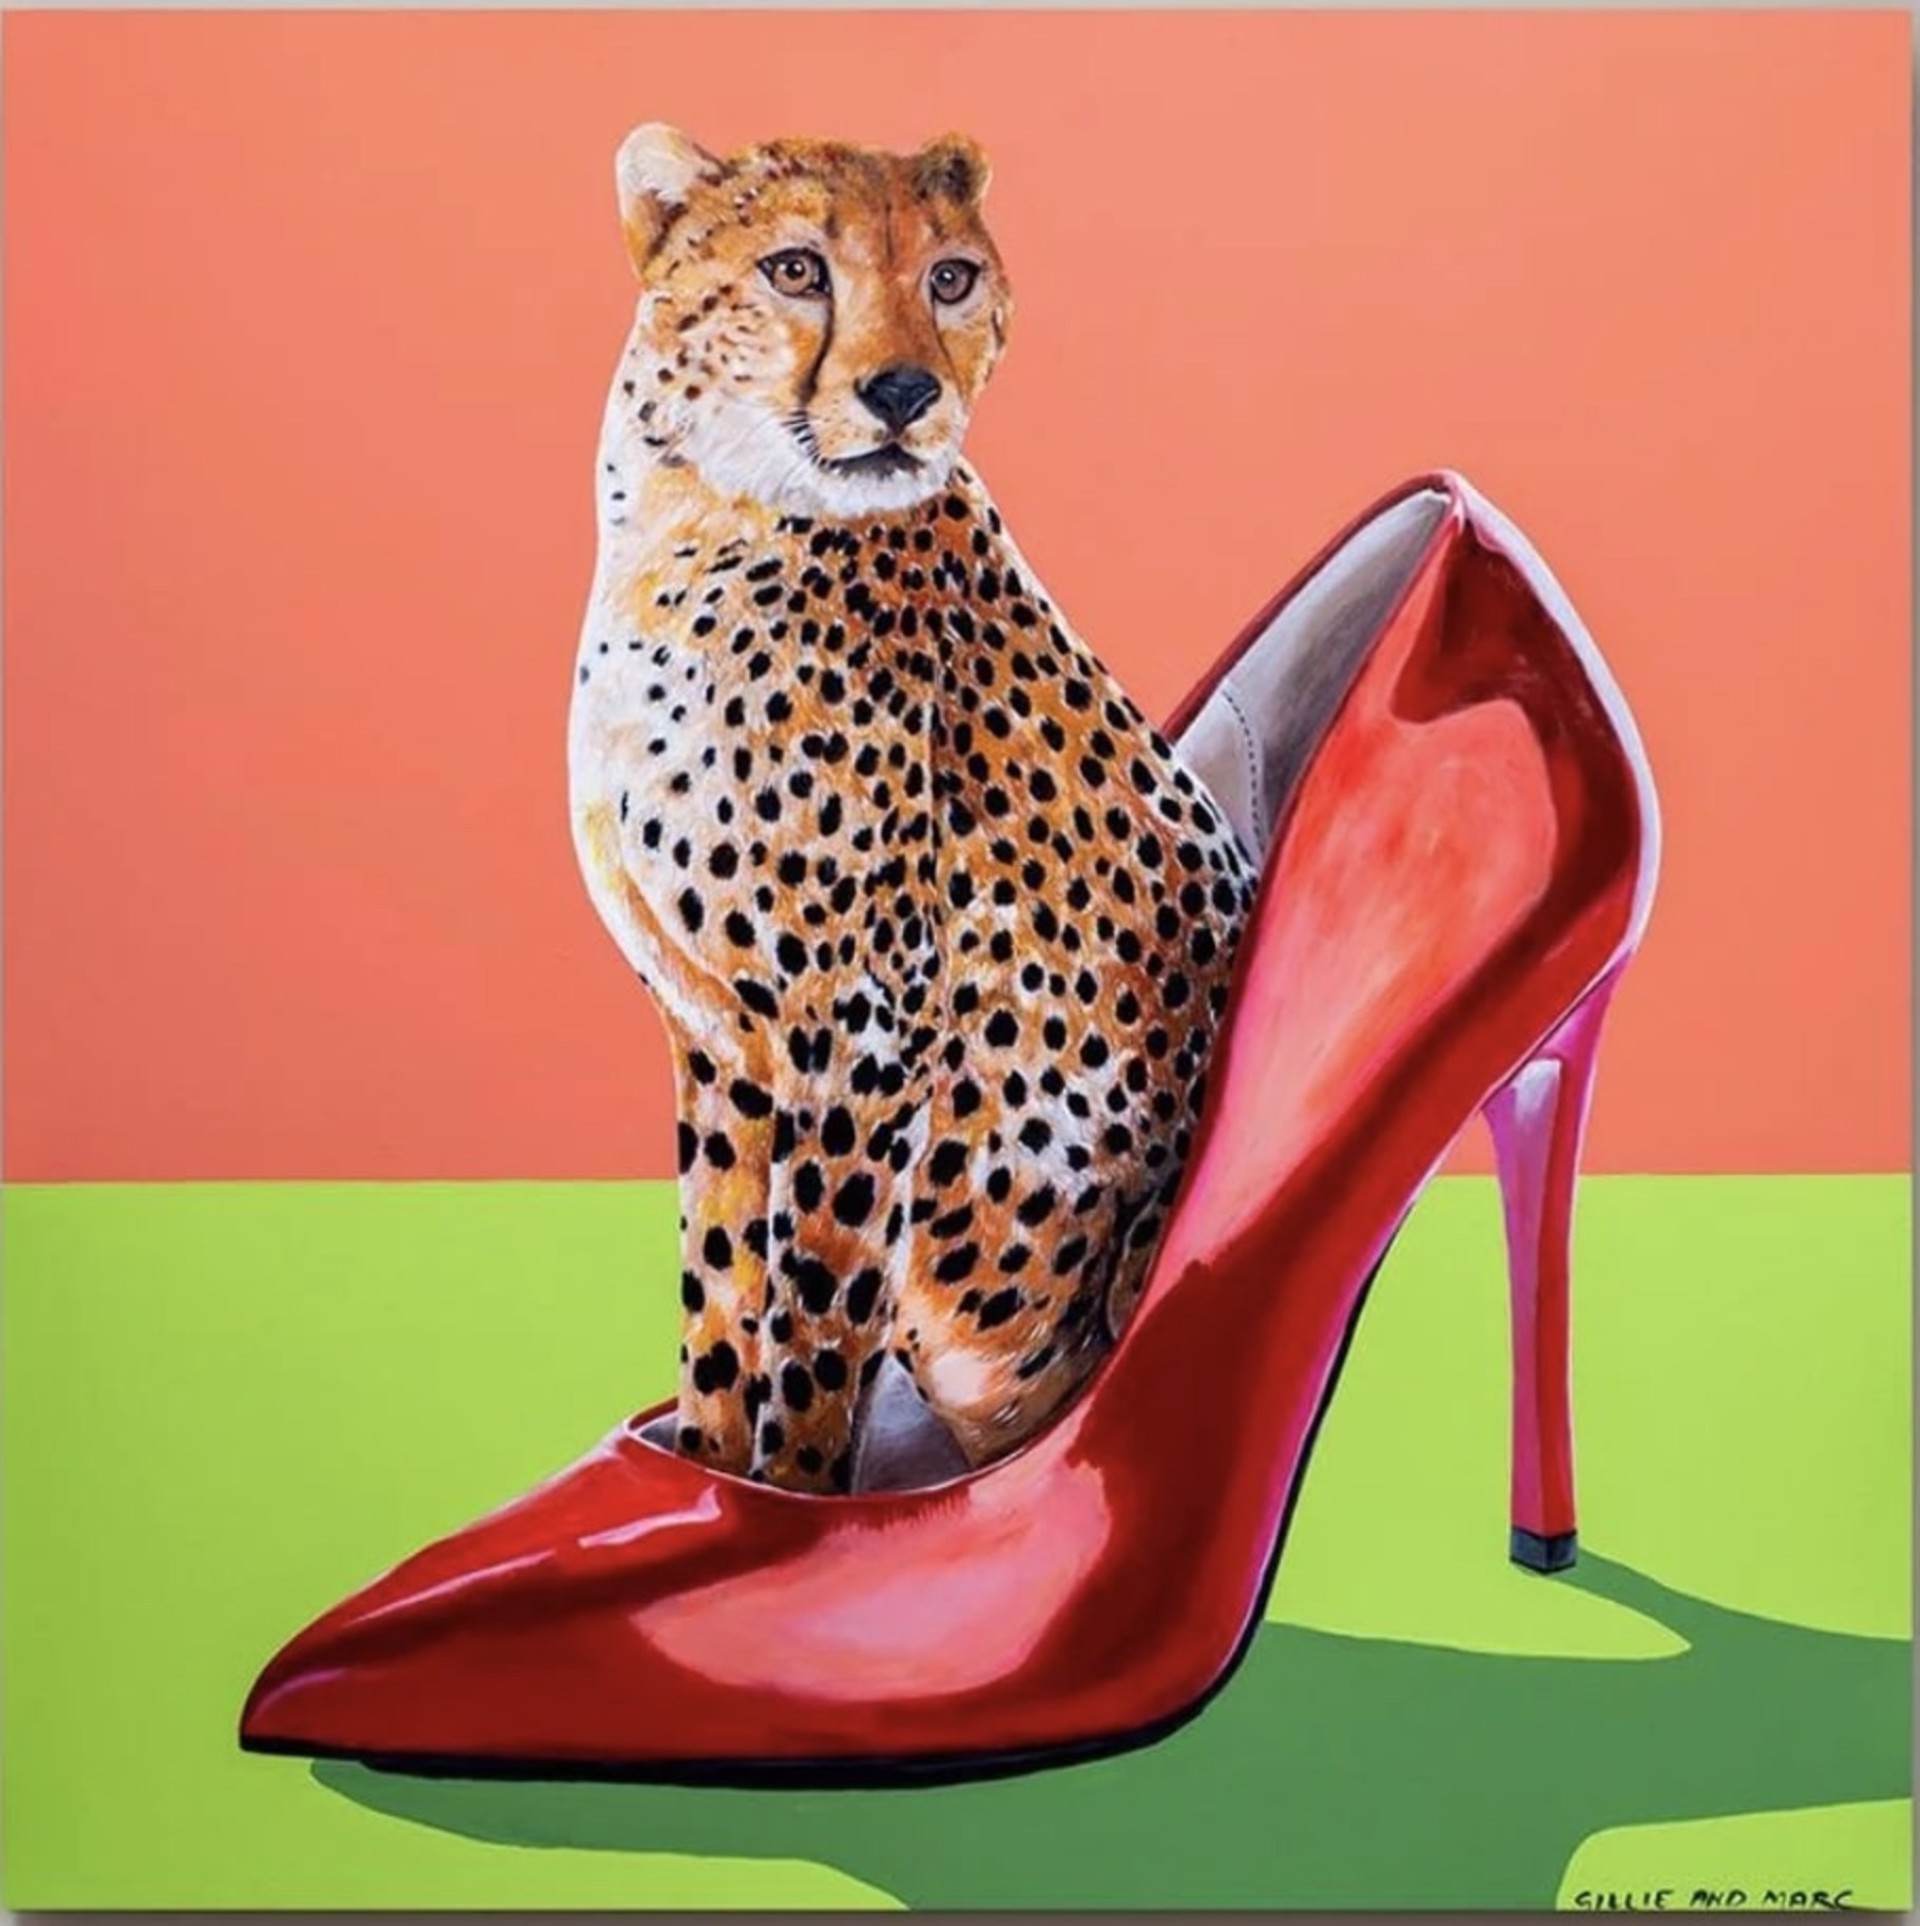 My Favorite Cheetah In A Shoe by Gillie & Marc